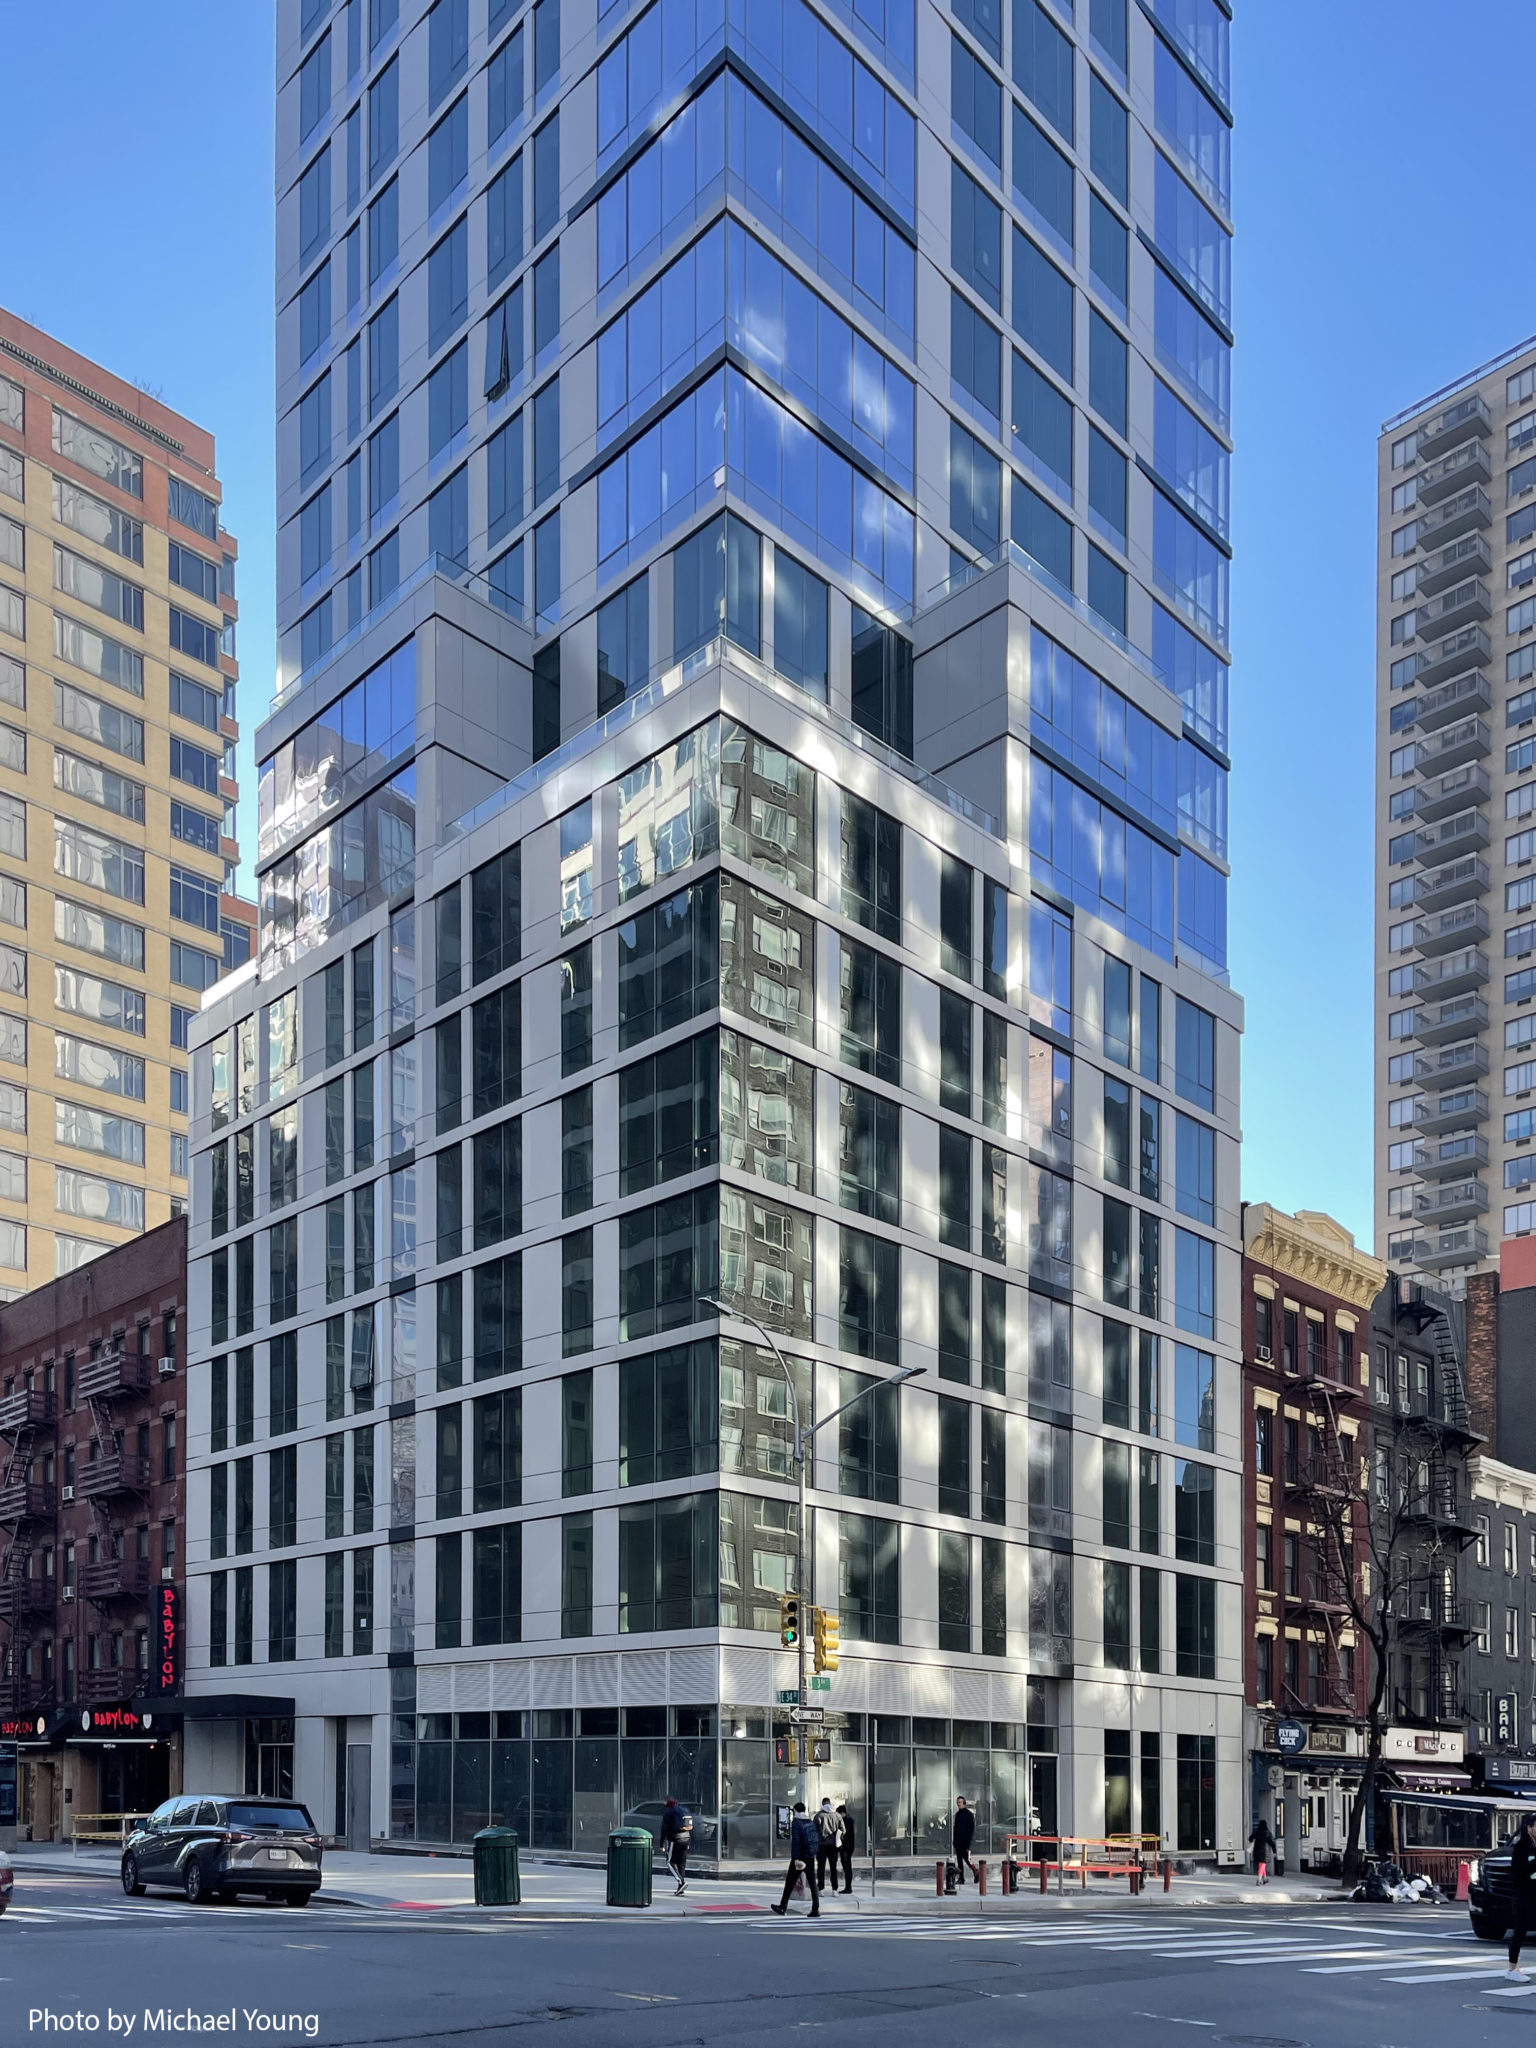 Eastlight Wraps Up Construction at 200 East 34th Street in Kips Bay